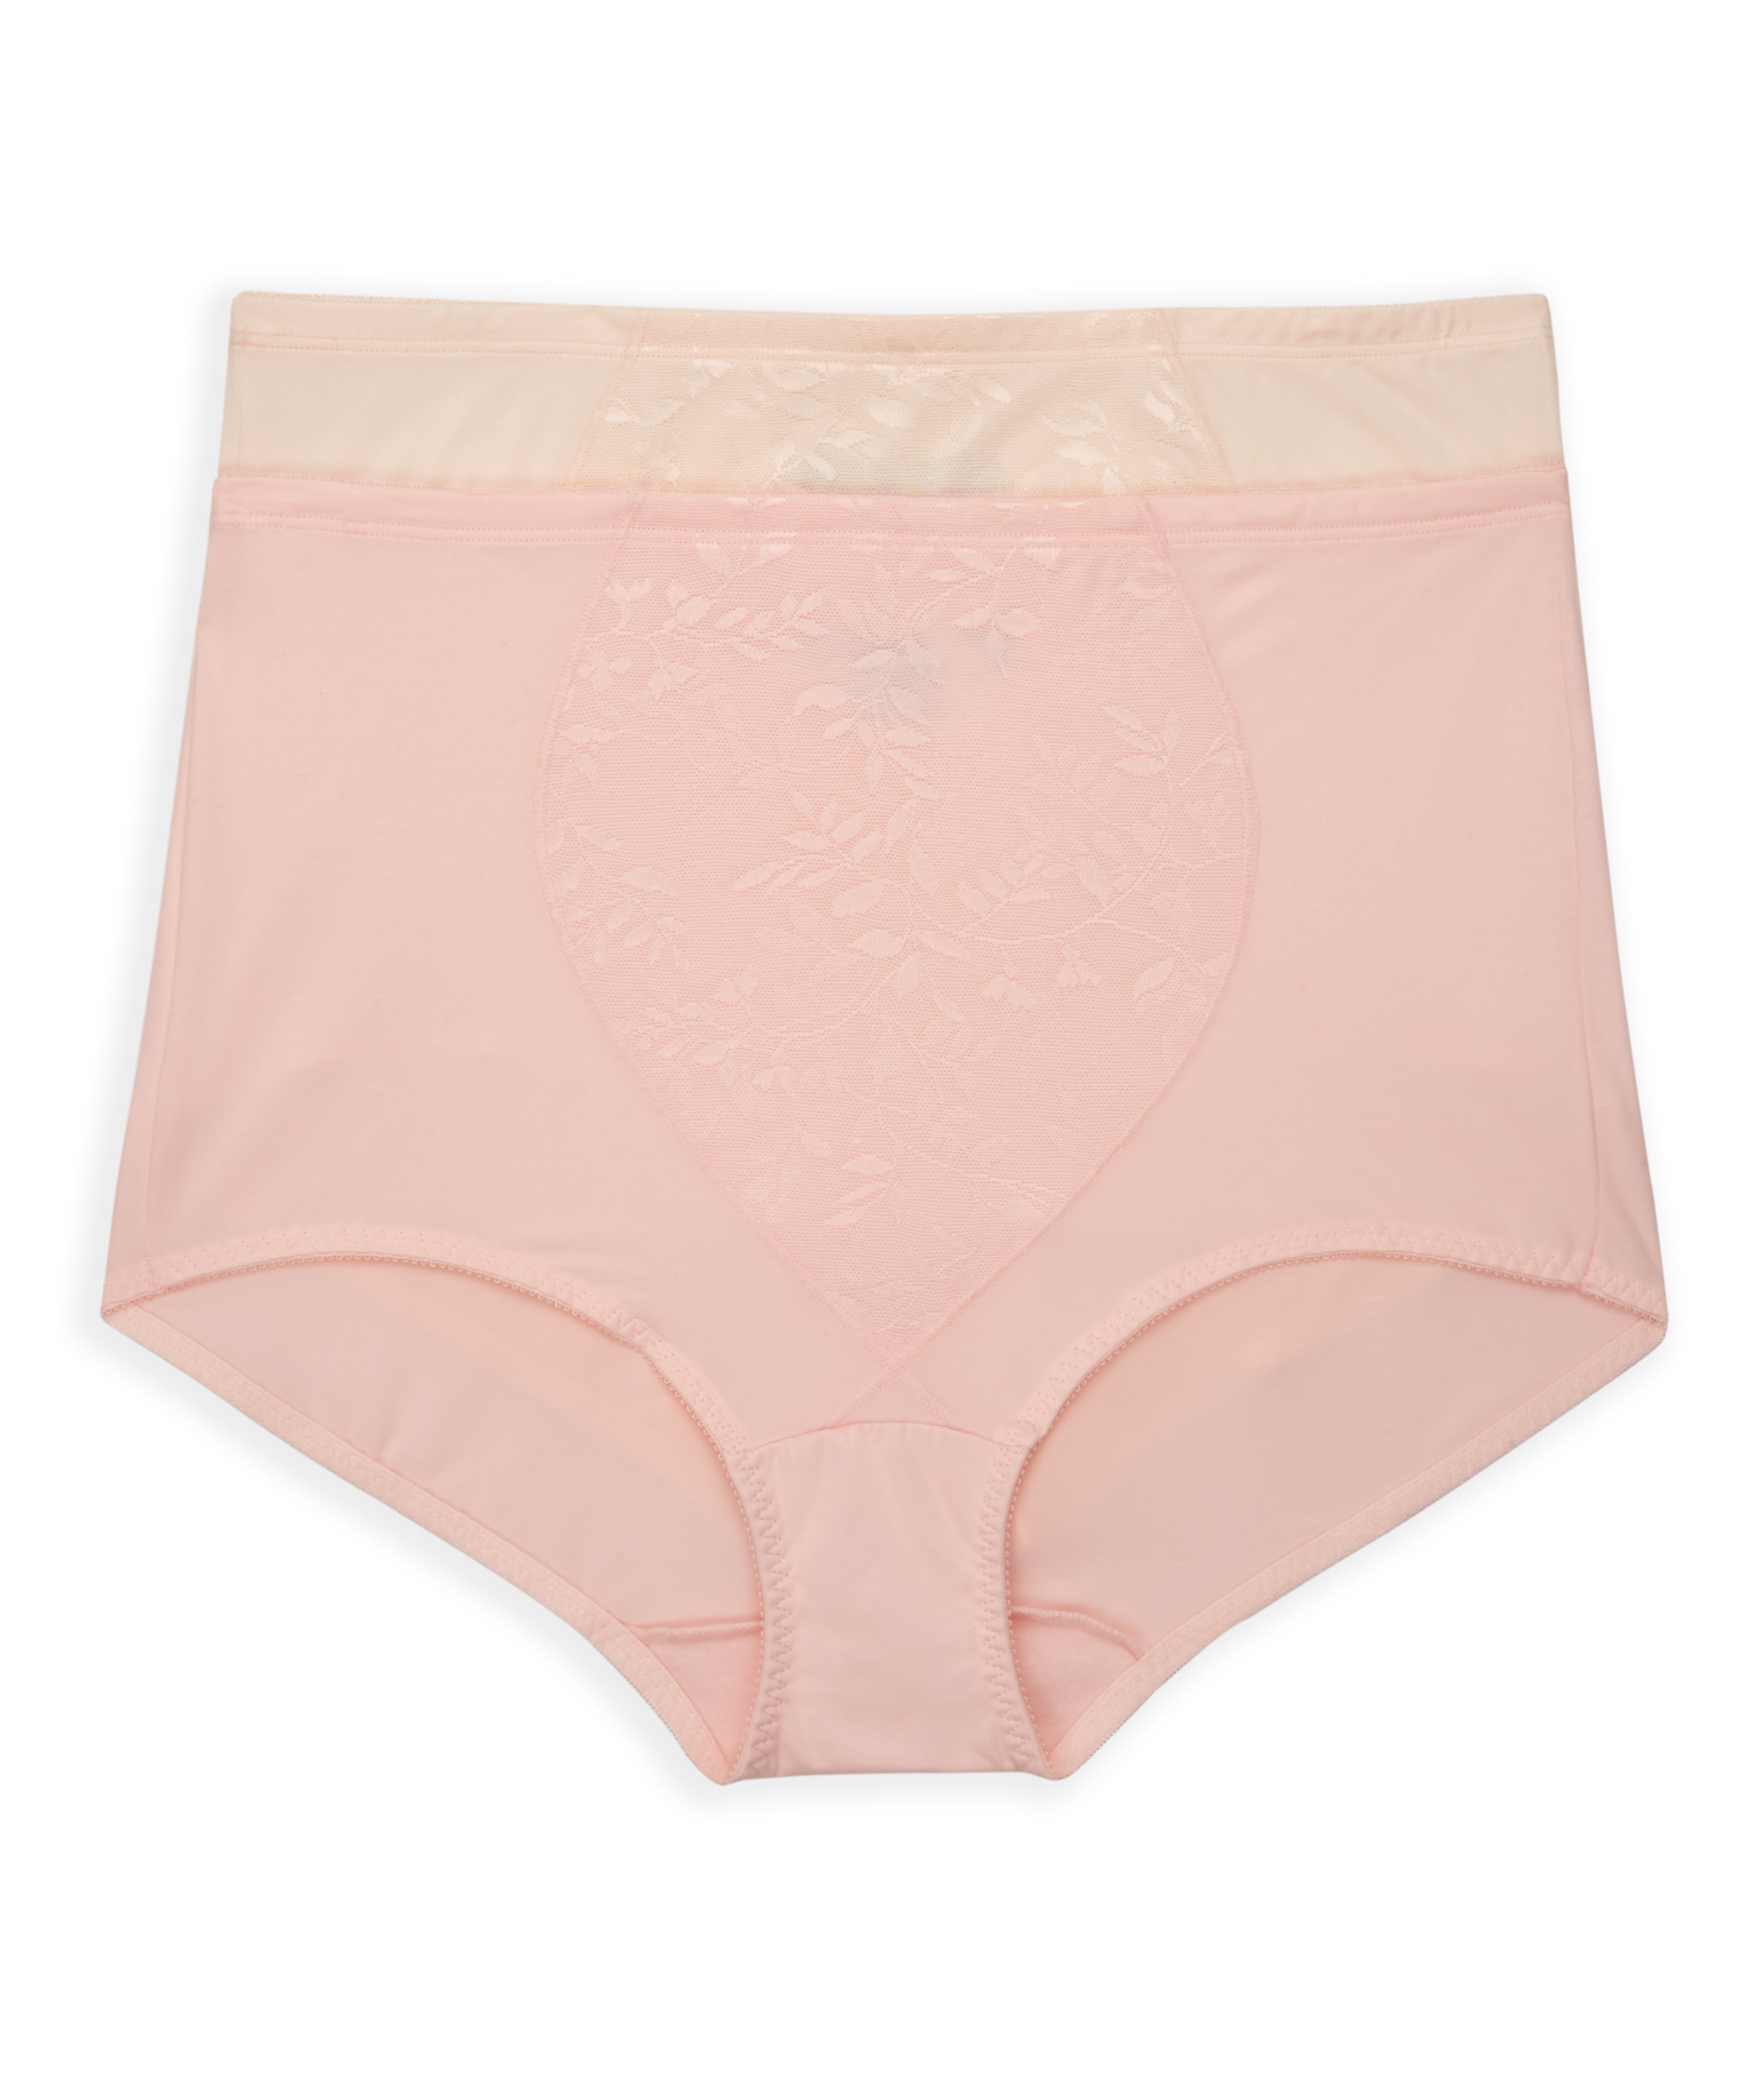 2-pack Invisible Light Shaping Briefs - Pink - Ladies